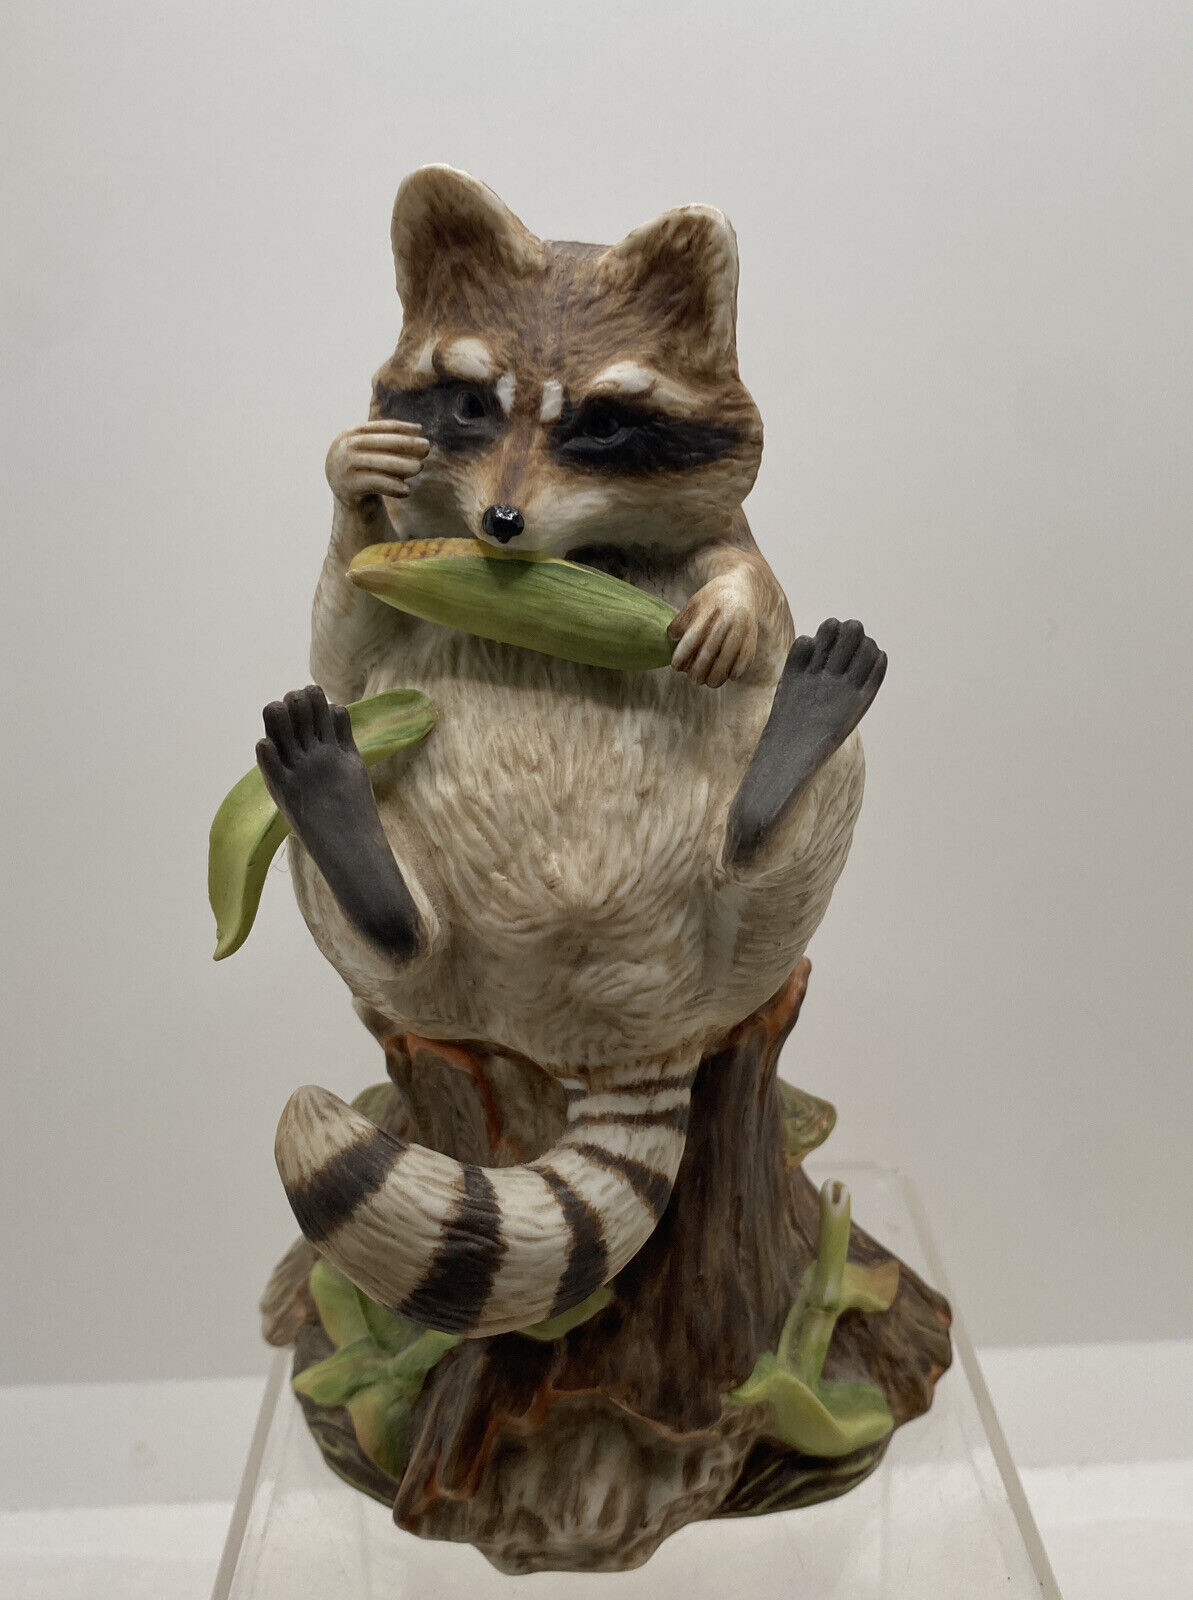 MARURI USA  Raccoon by WD Gaither 1983 Limited Edition 046/ 1200 Porcelain